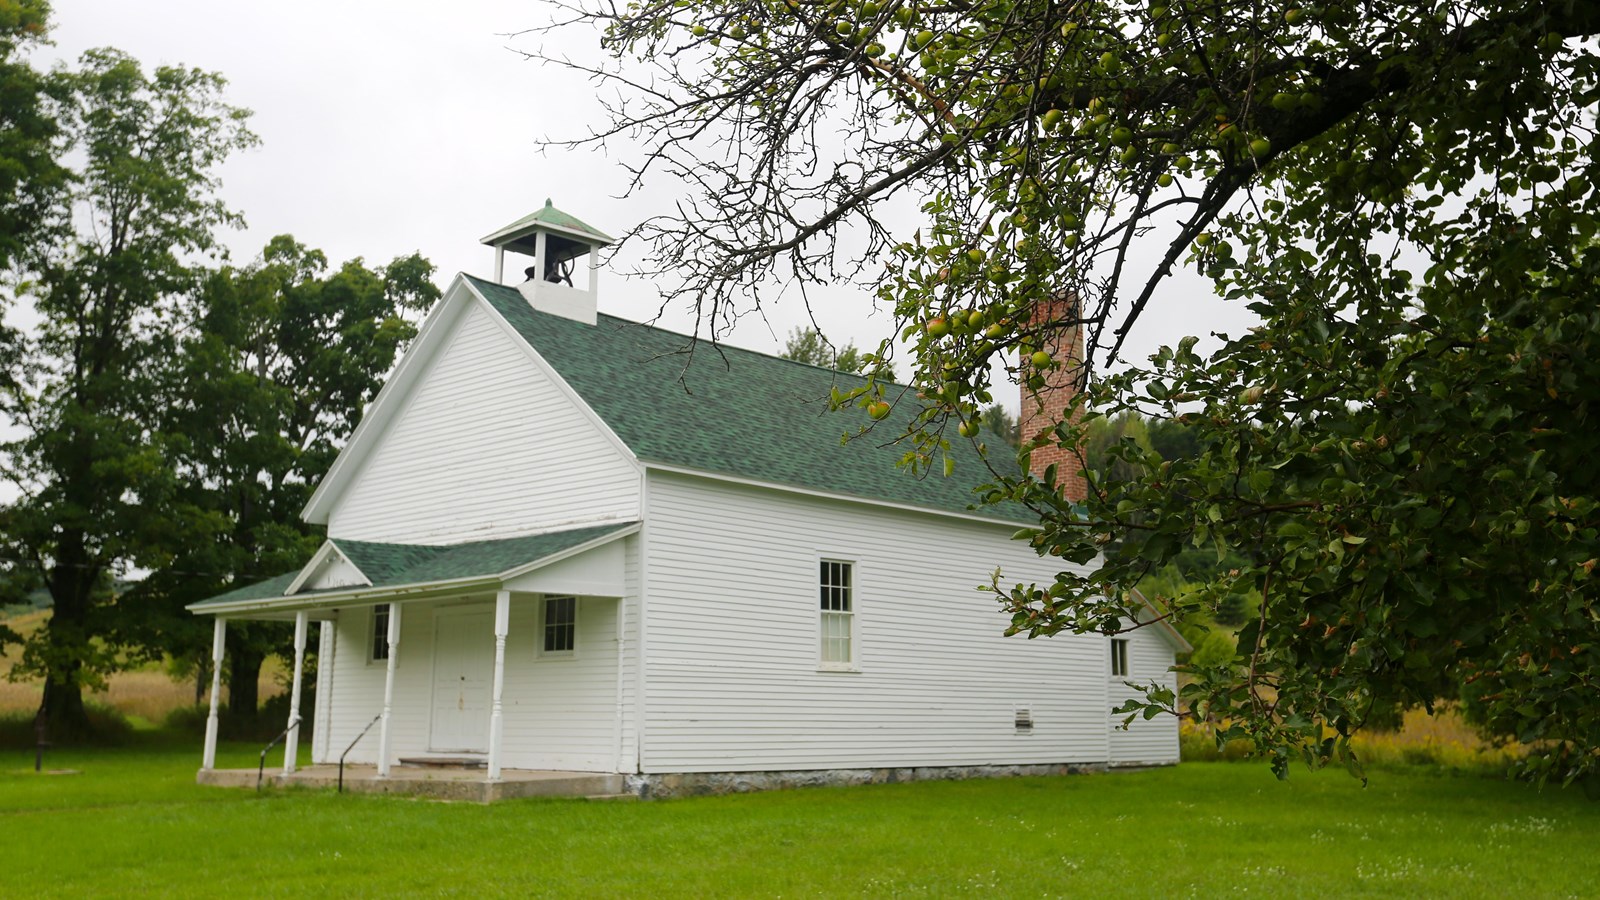 A small white building with front porch and bell in white small cupola on the roof